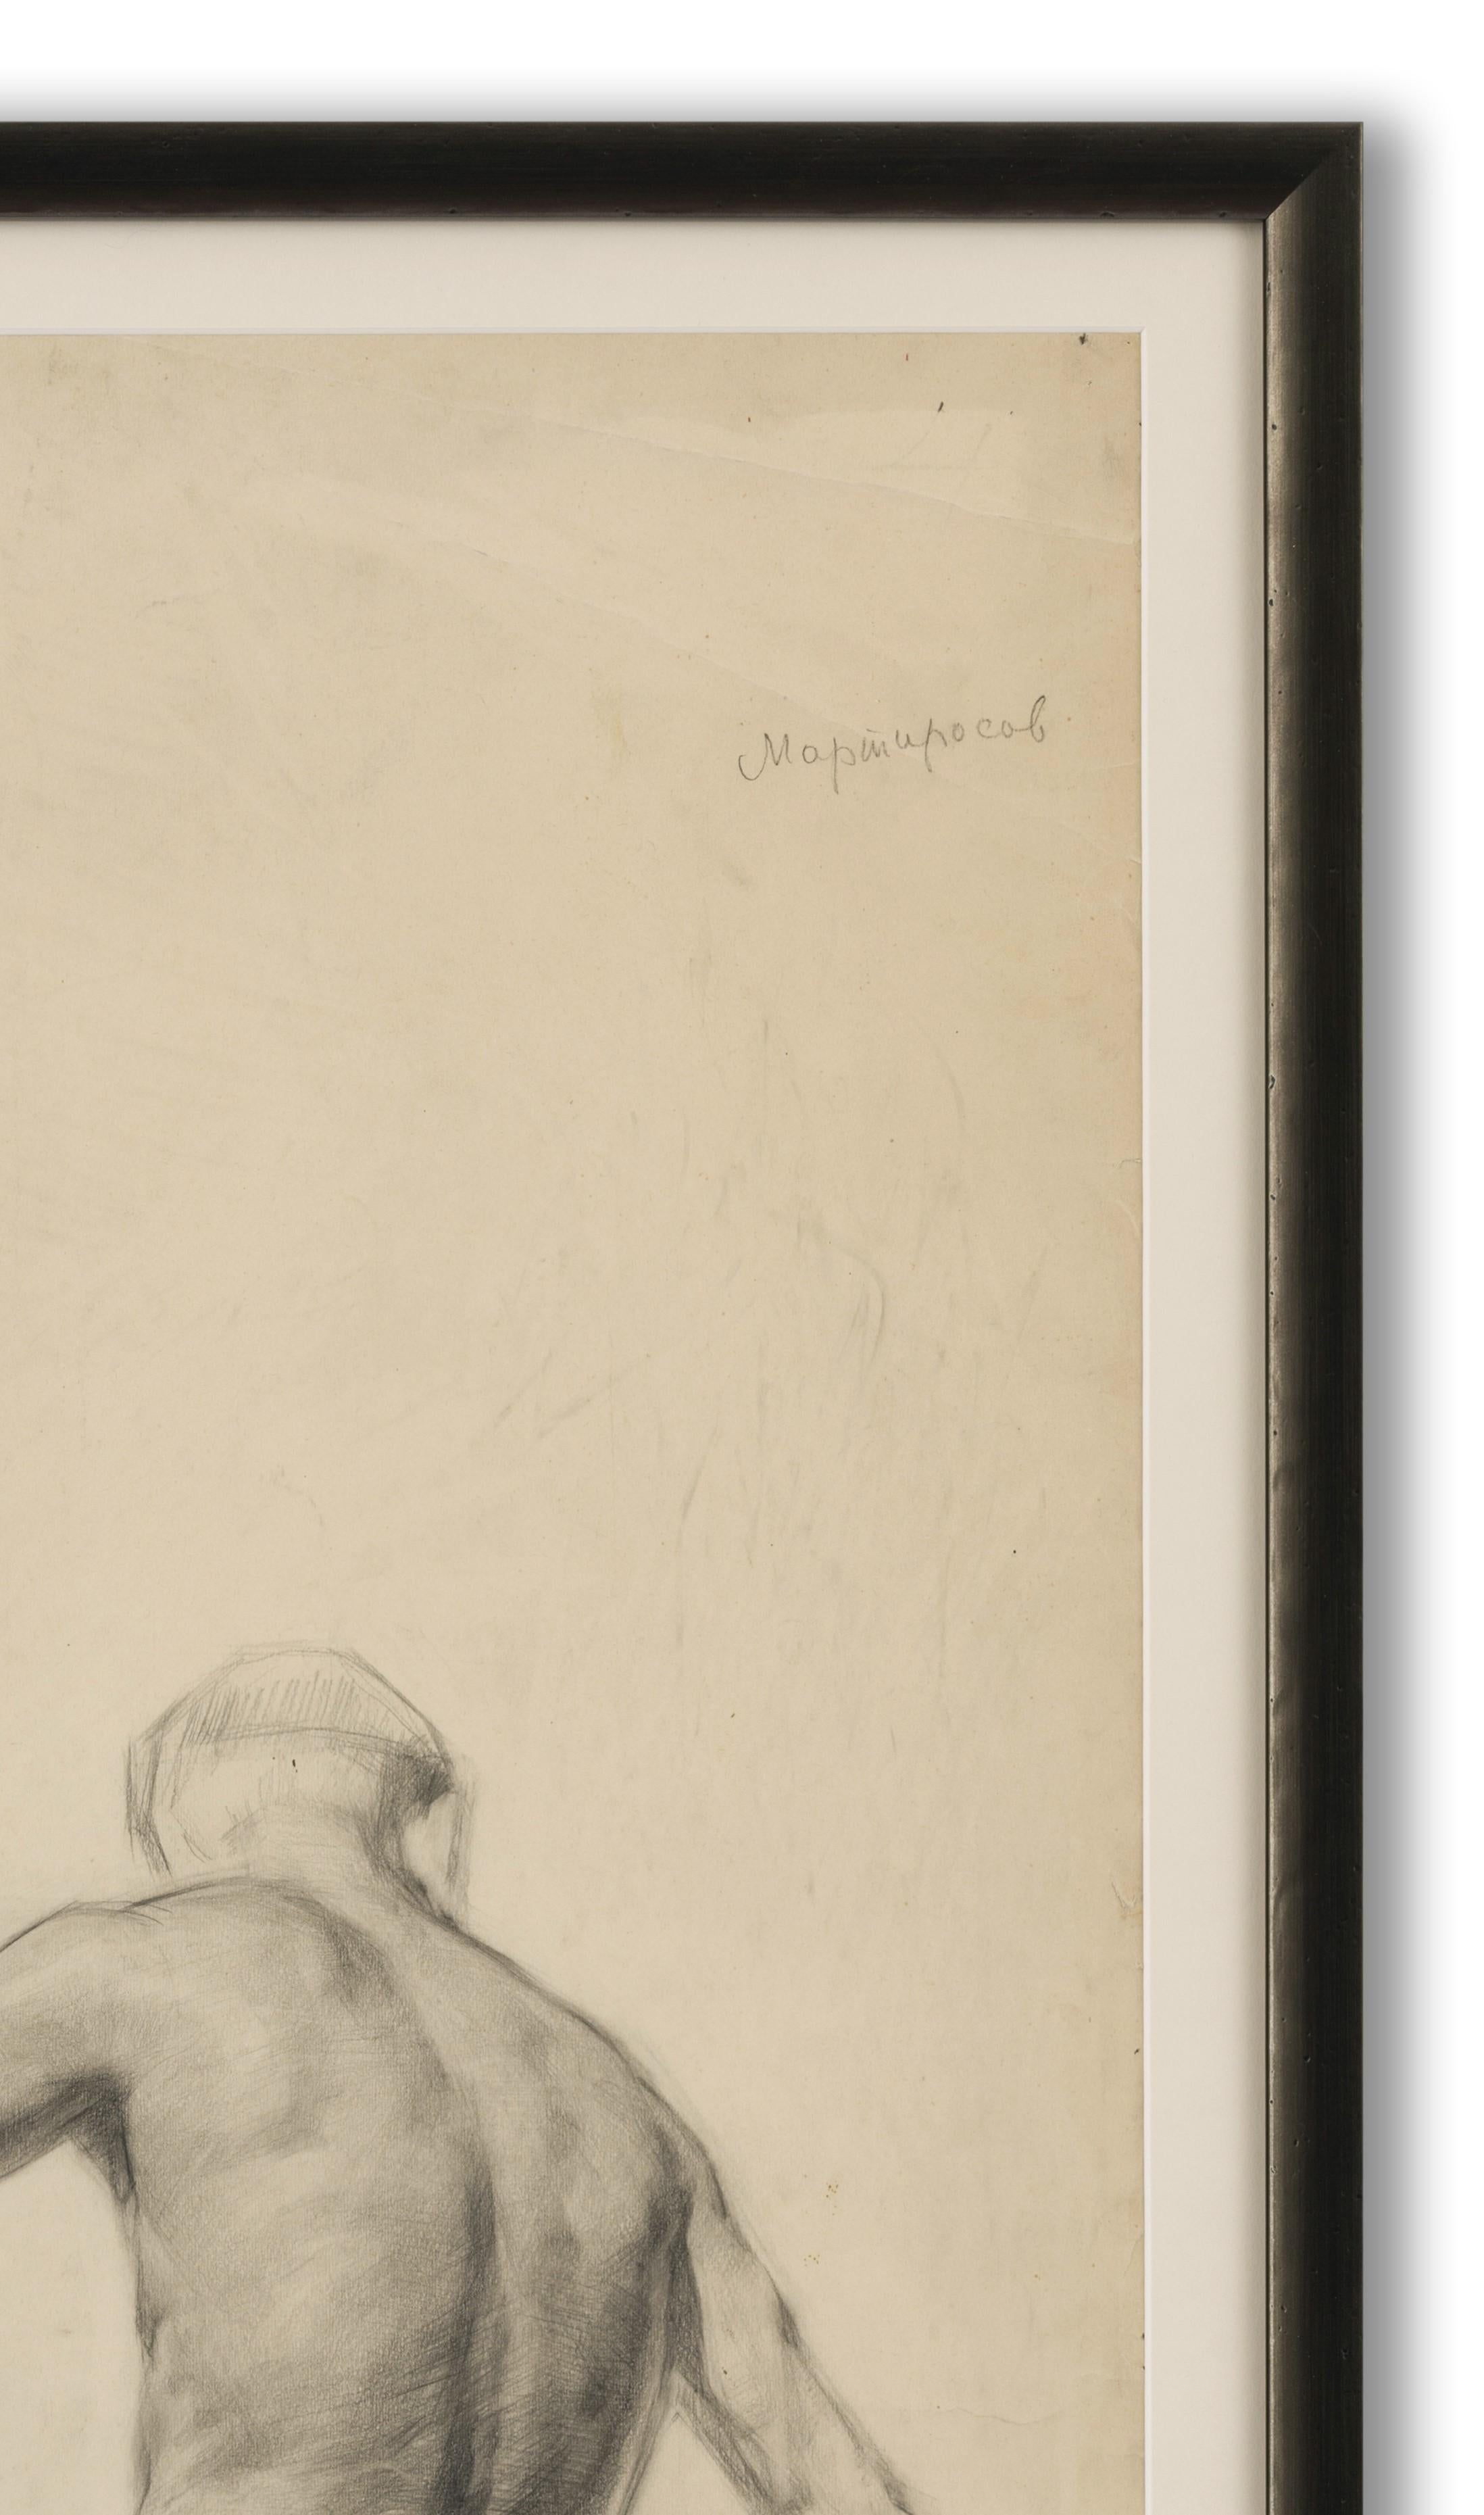 Pencil on paper, signed (upper right), 76cm x 56cm (88cm x 68cm framed). 

A graduate of the Kiev Art Academy in 1957. Drawings of the nude, called academic studies, were central to academic art training in Europe from the 16th century onwards. With